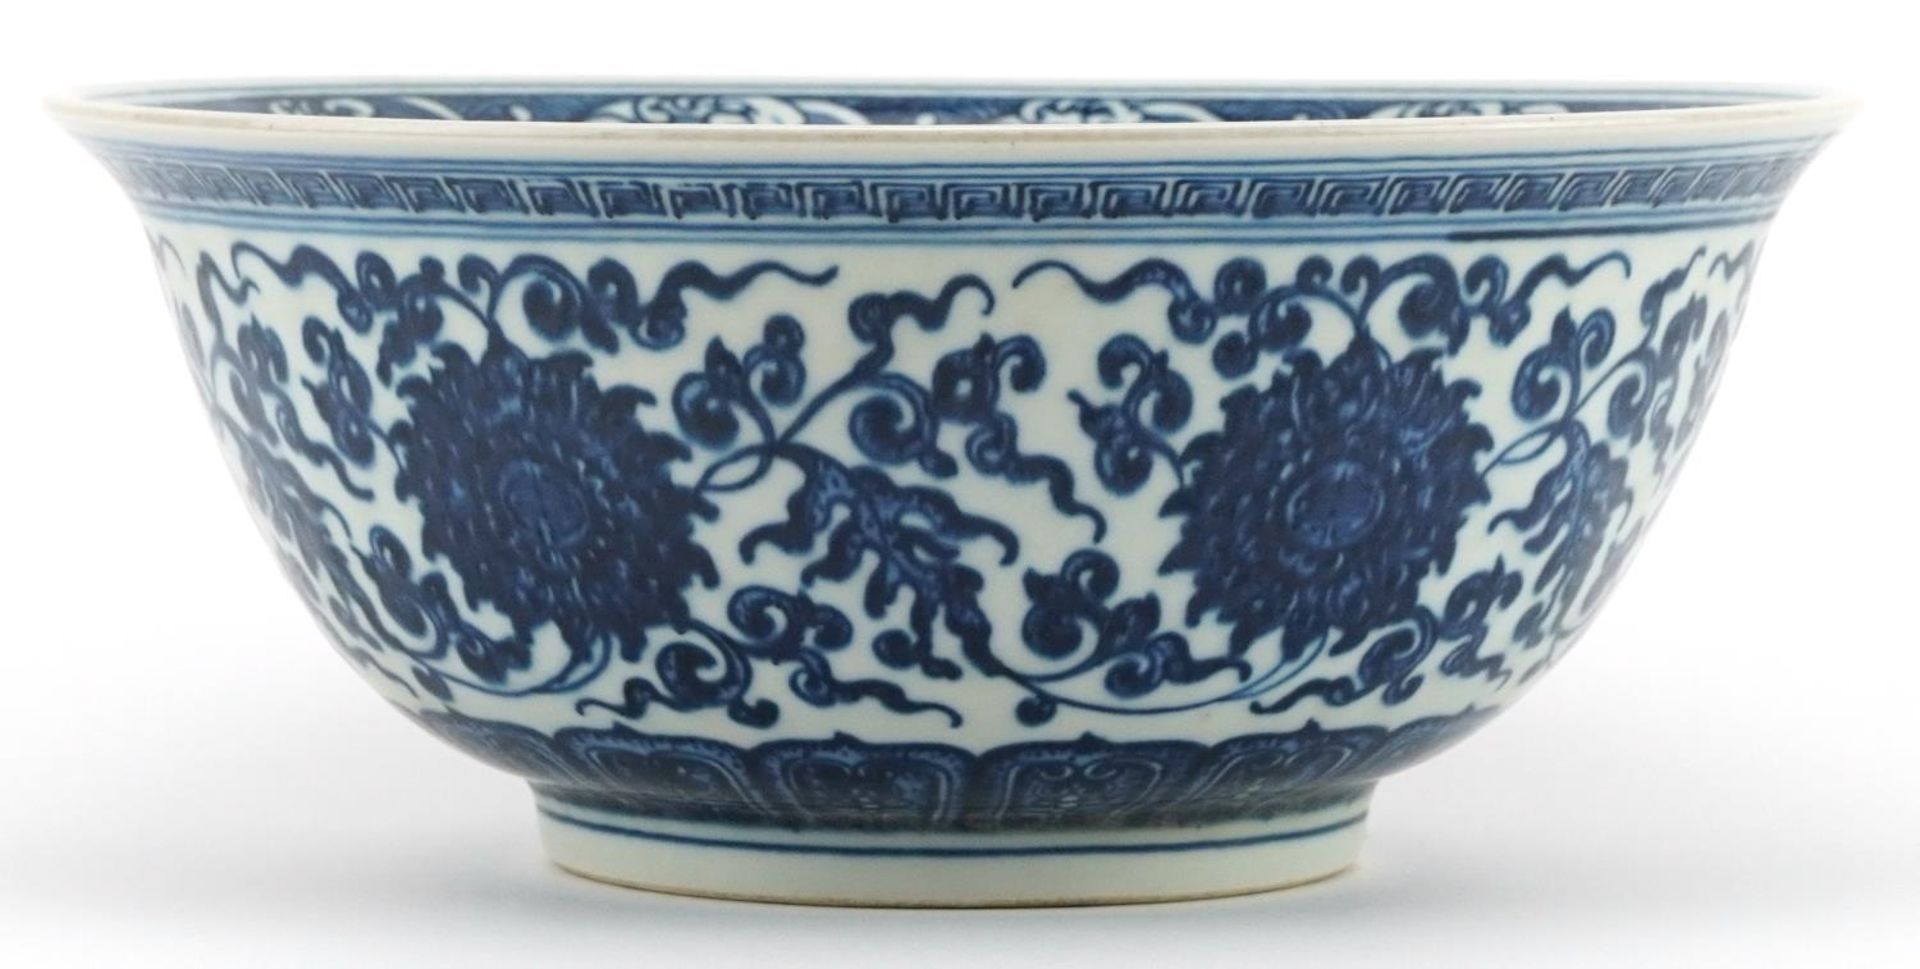 Chinese Islamic blue and white porcelain bowl hand painted with flower heads amongst scrolling - Image 2 of 4